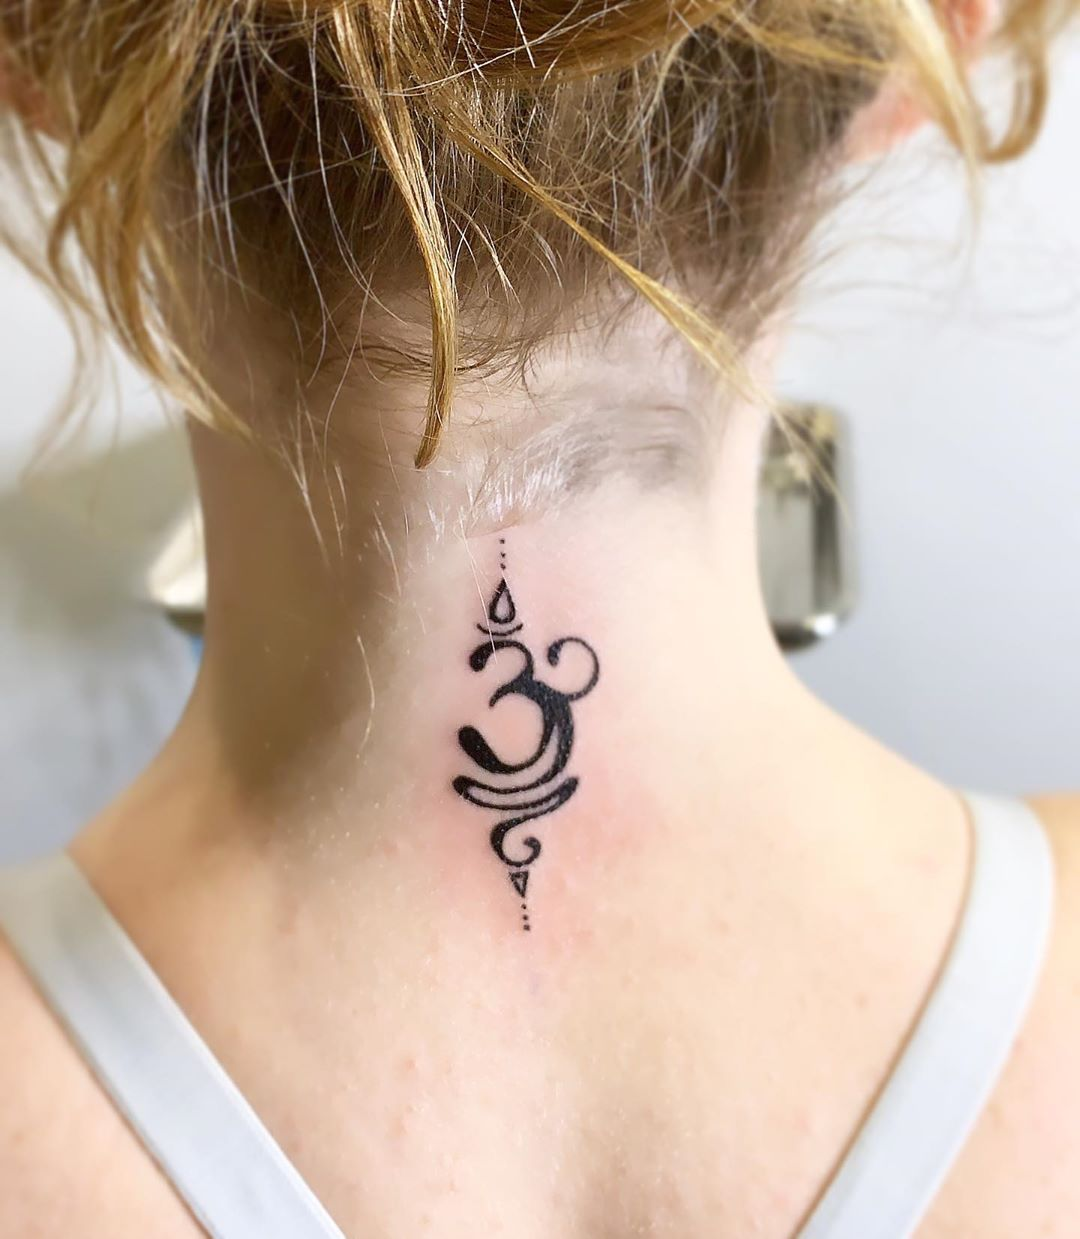 I got a spontaneous tattoo with my best friend, and it's taught me to live  life fully